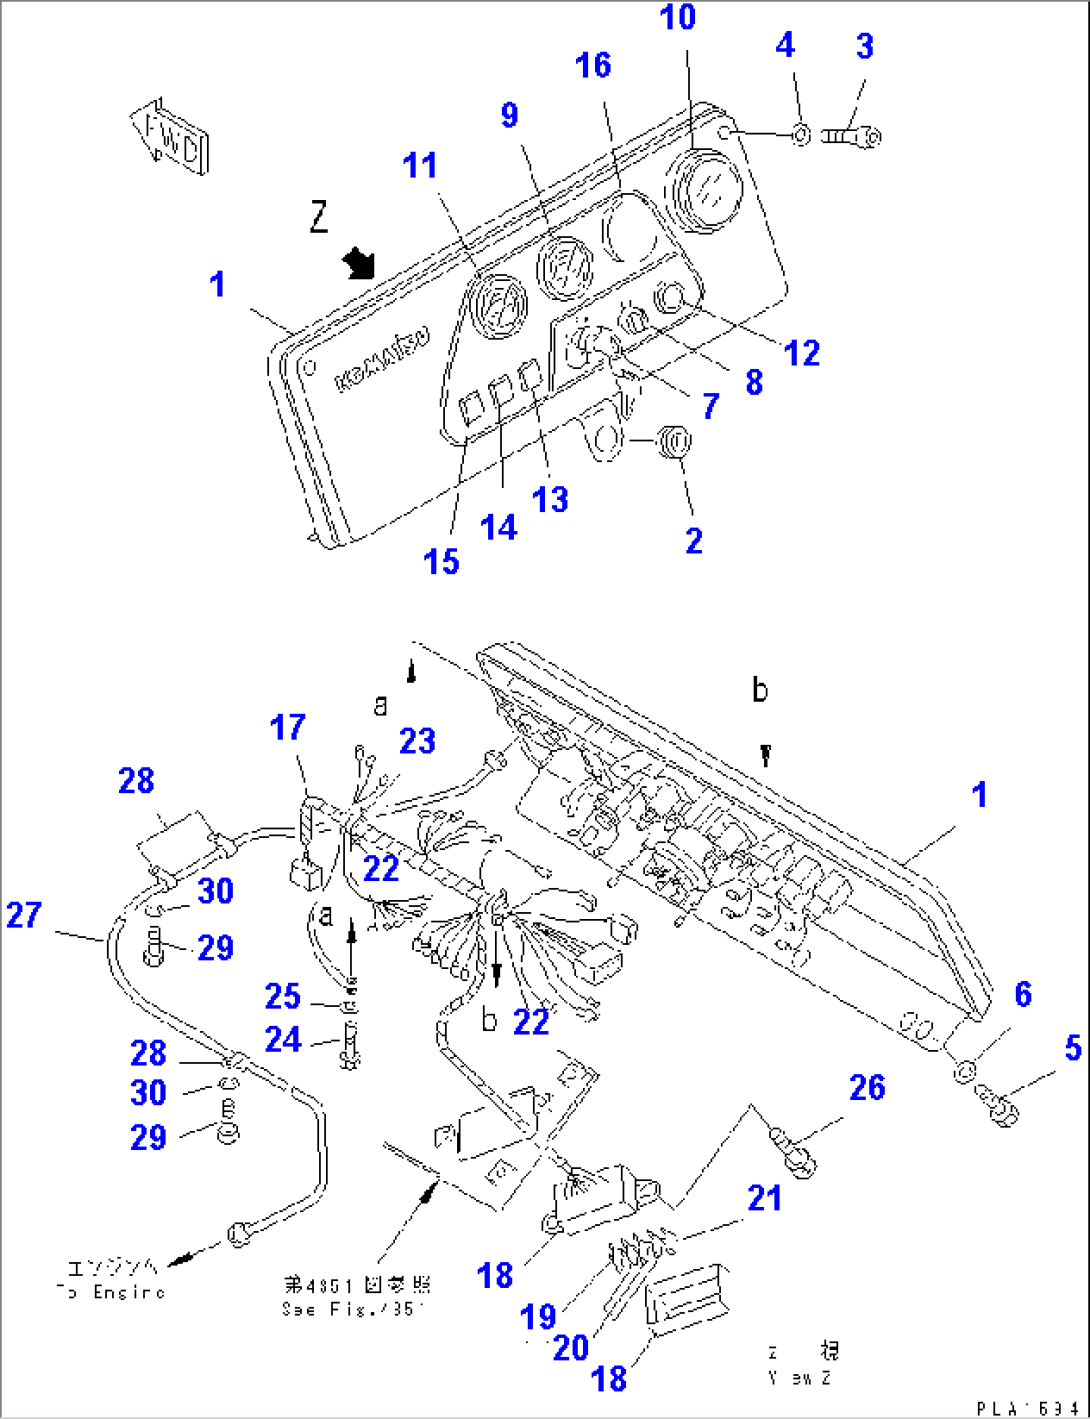 INSTRUMENT PANEL (FOR MONO LEVER STEERING) (WITH TACHOMETER)